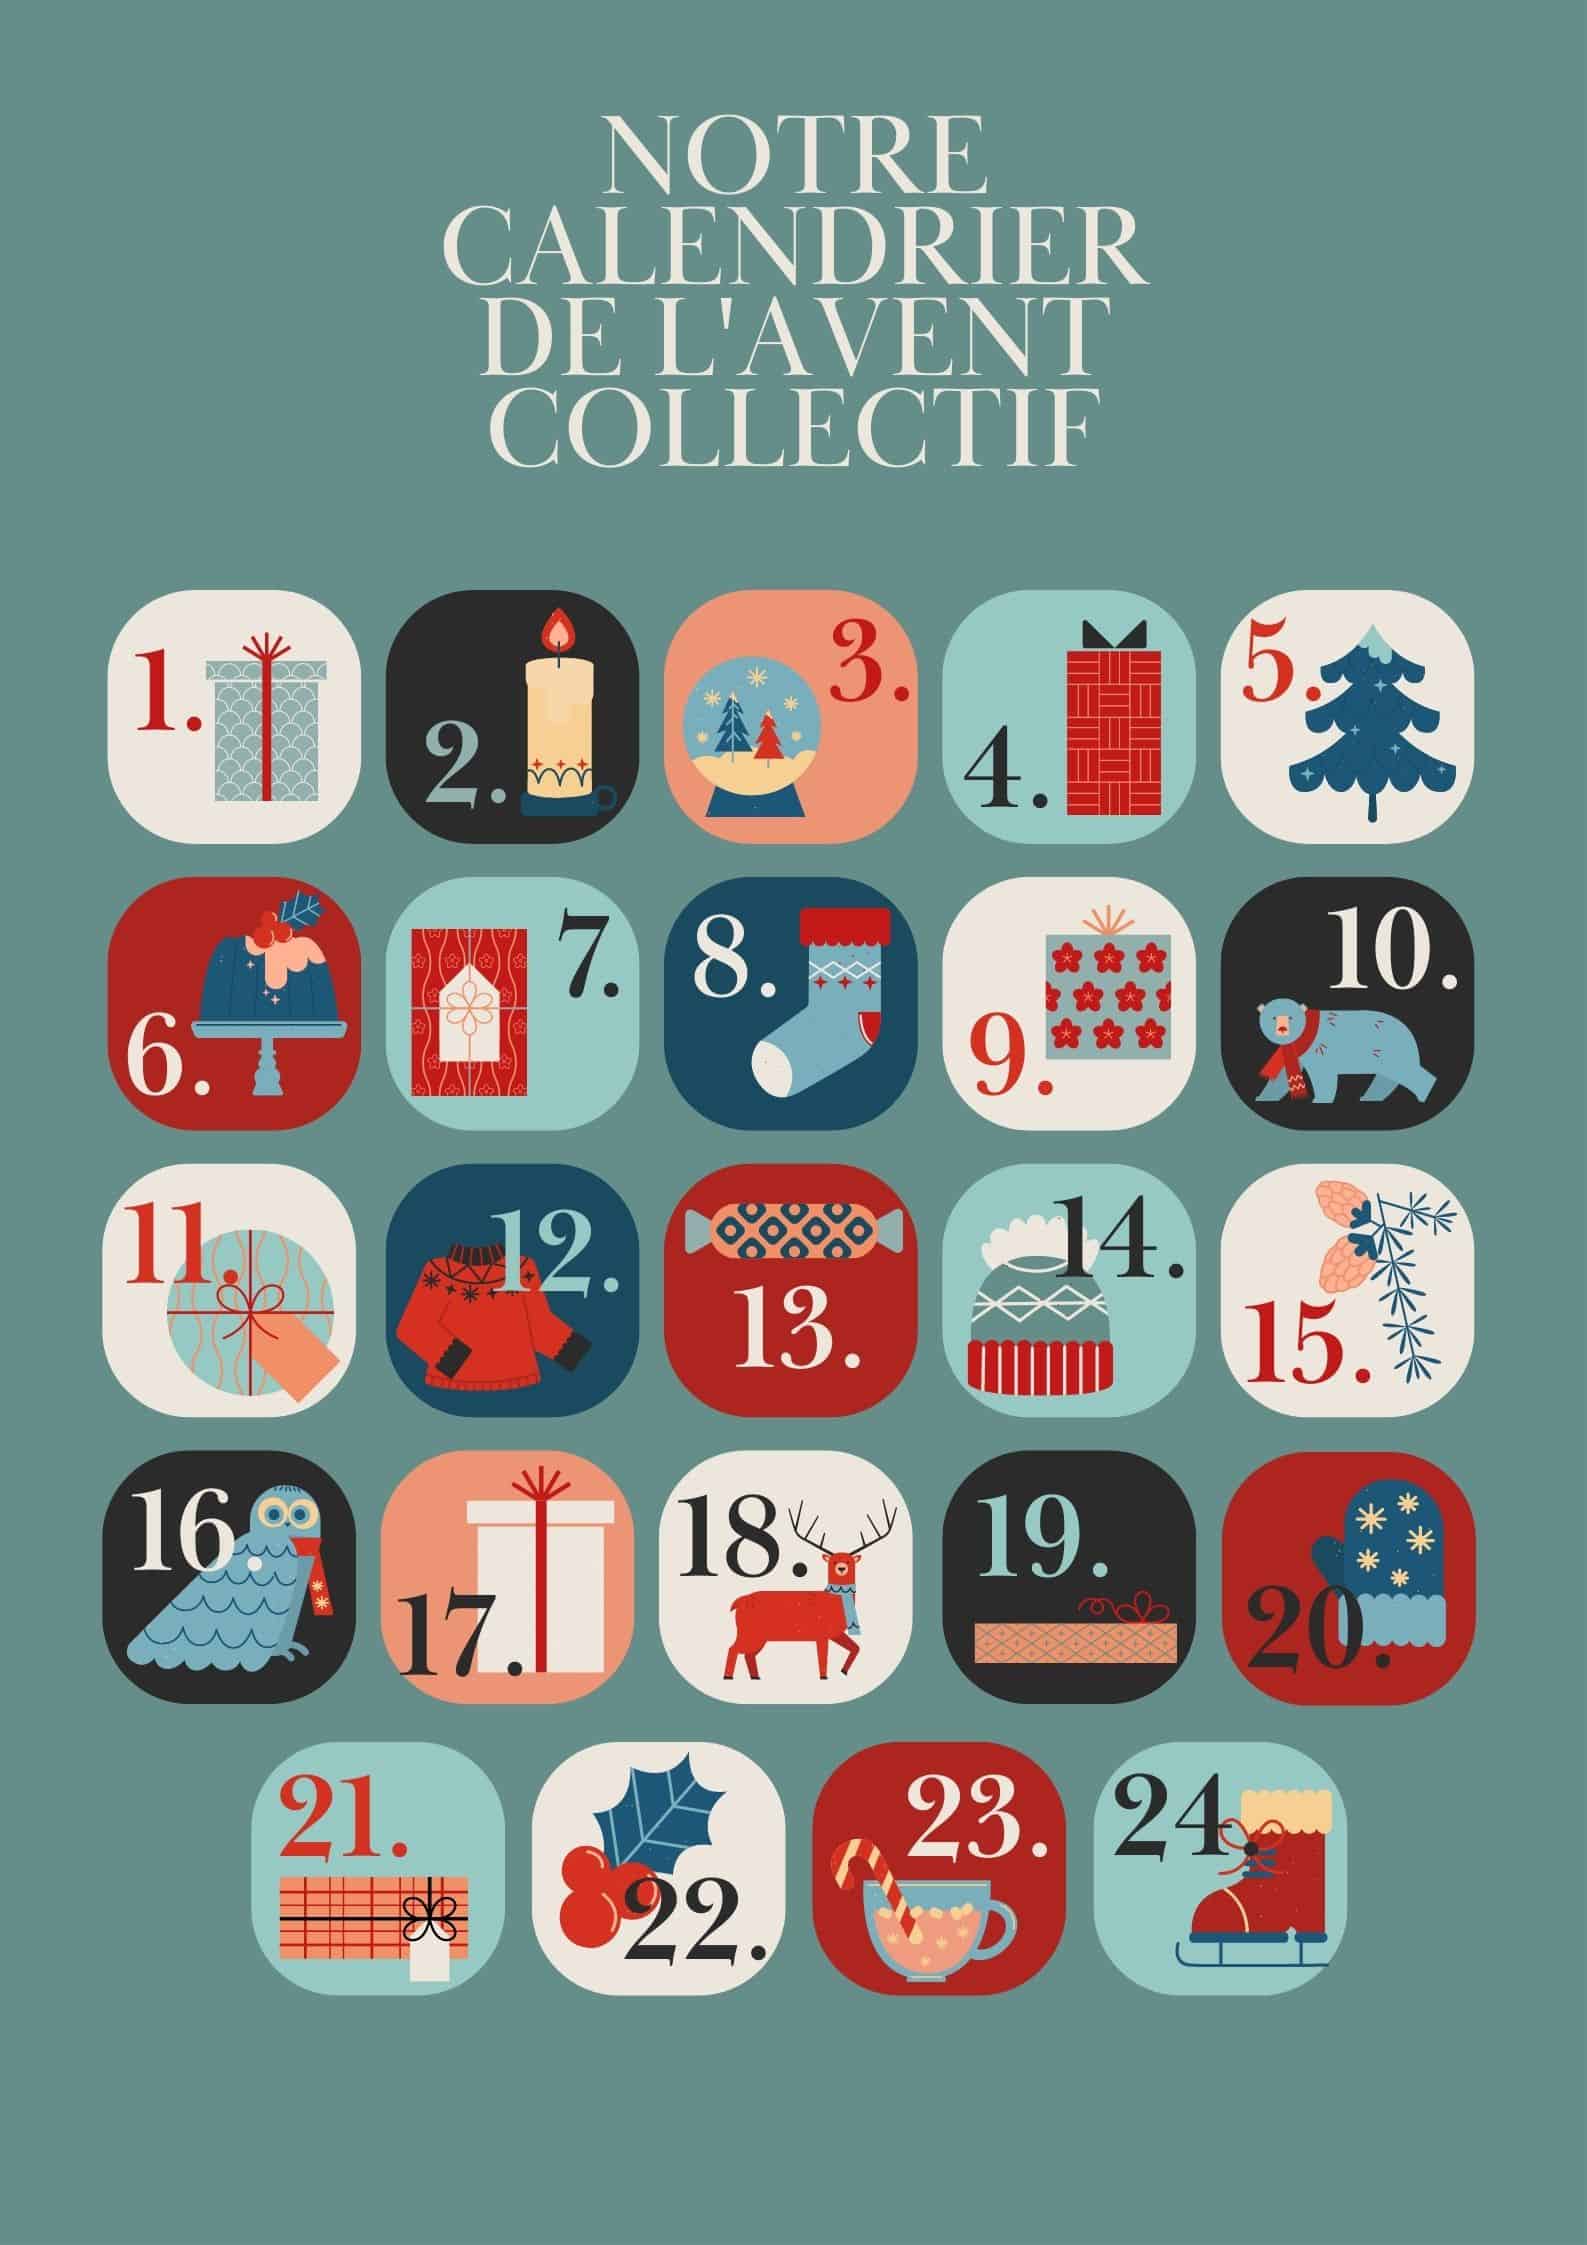 You are currently viewing Notre calendrier de l’Avent collectif